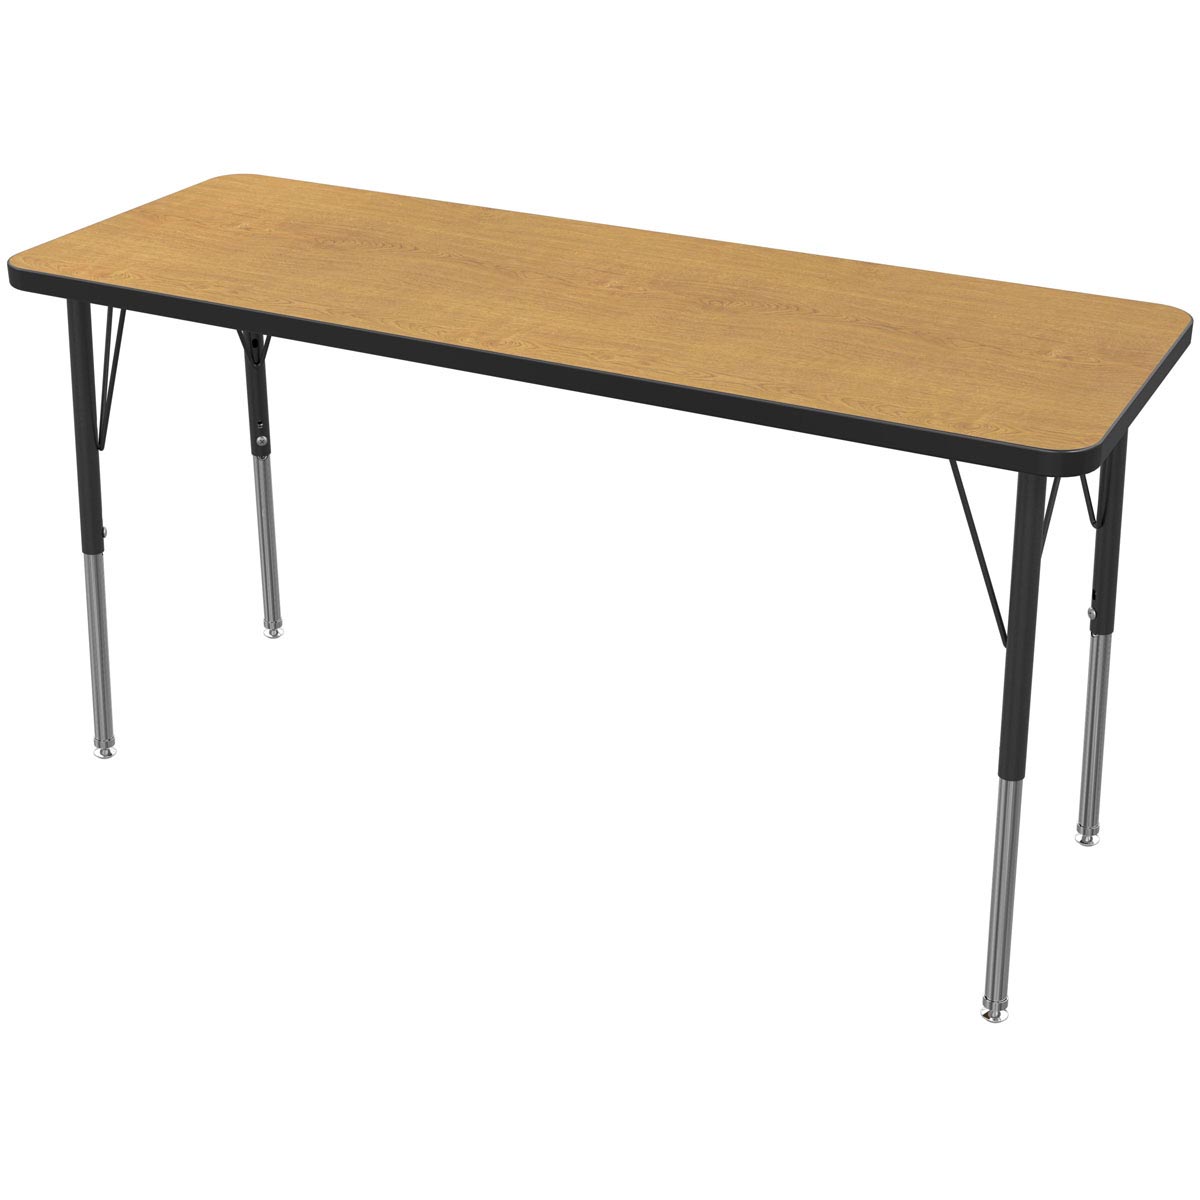 MG Series Adjustable Height Activity Table, 20" x 54" Rectangle